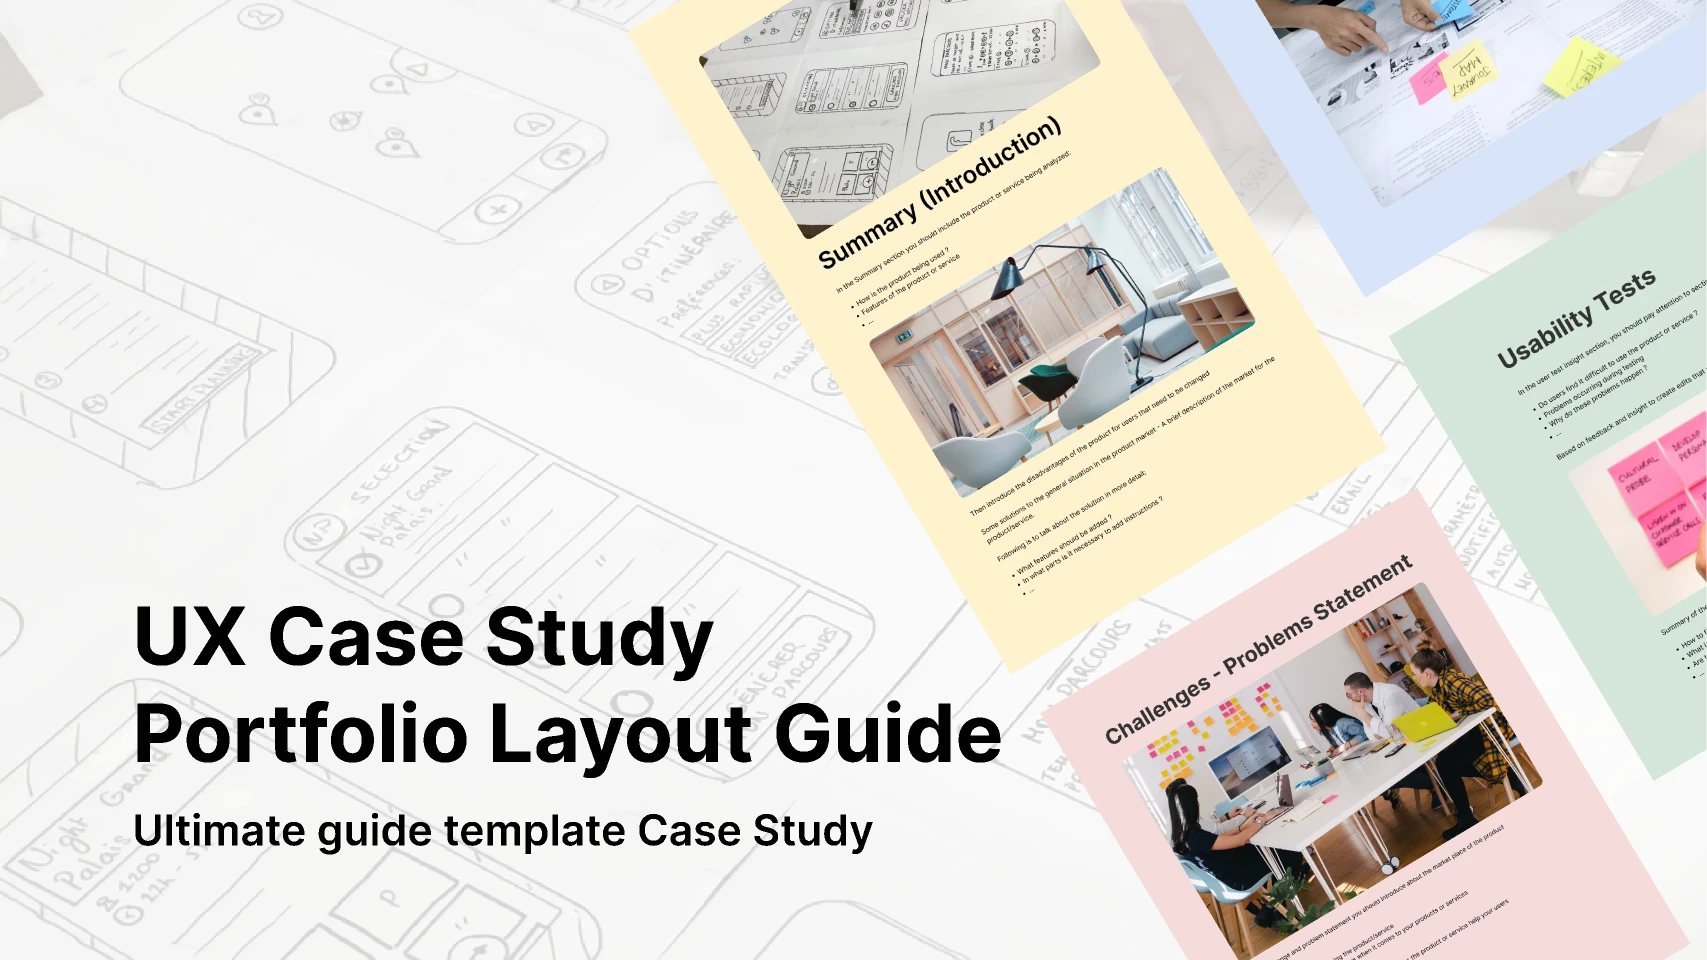 UX Case Study Portfolio Layout Guide for Figma and Adobe XD